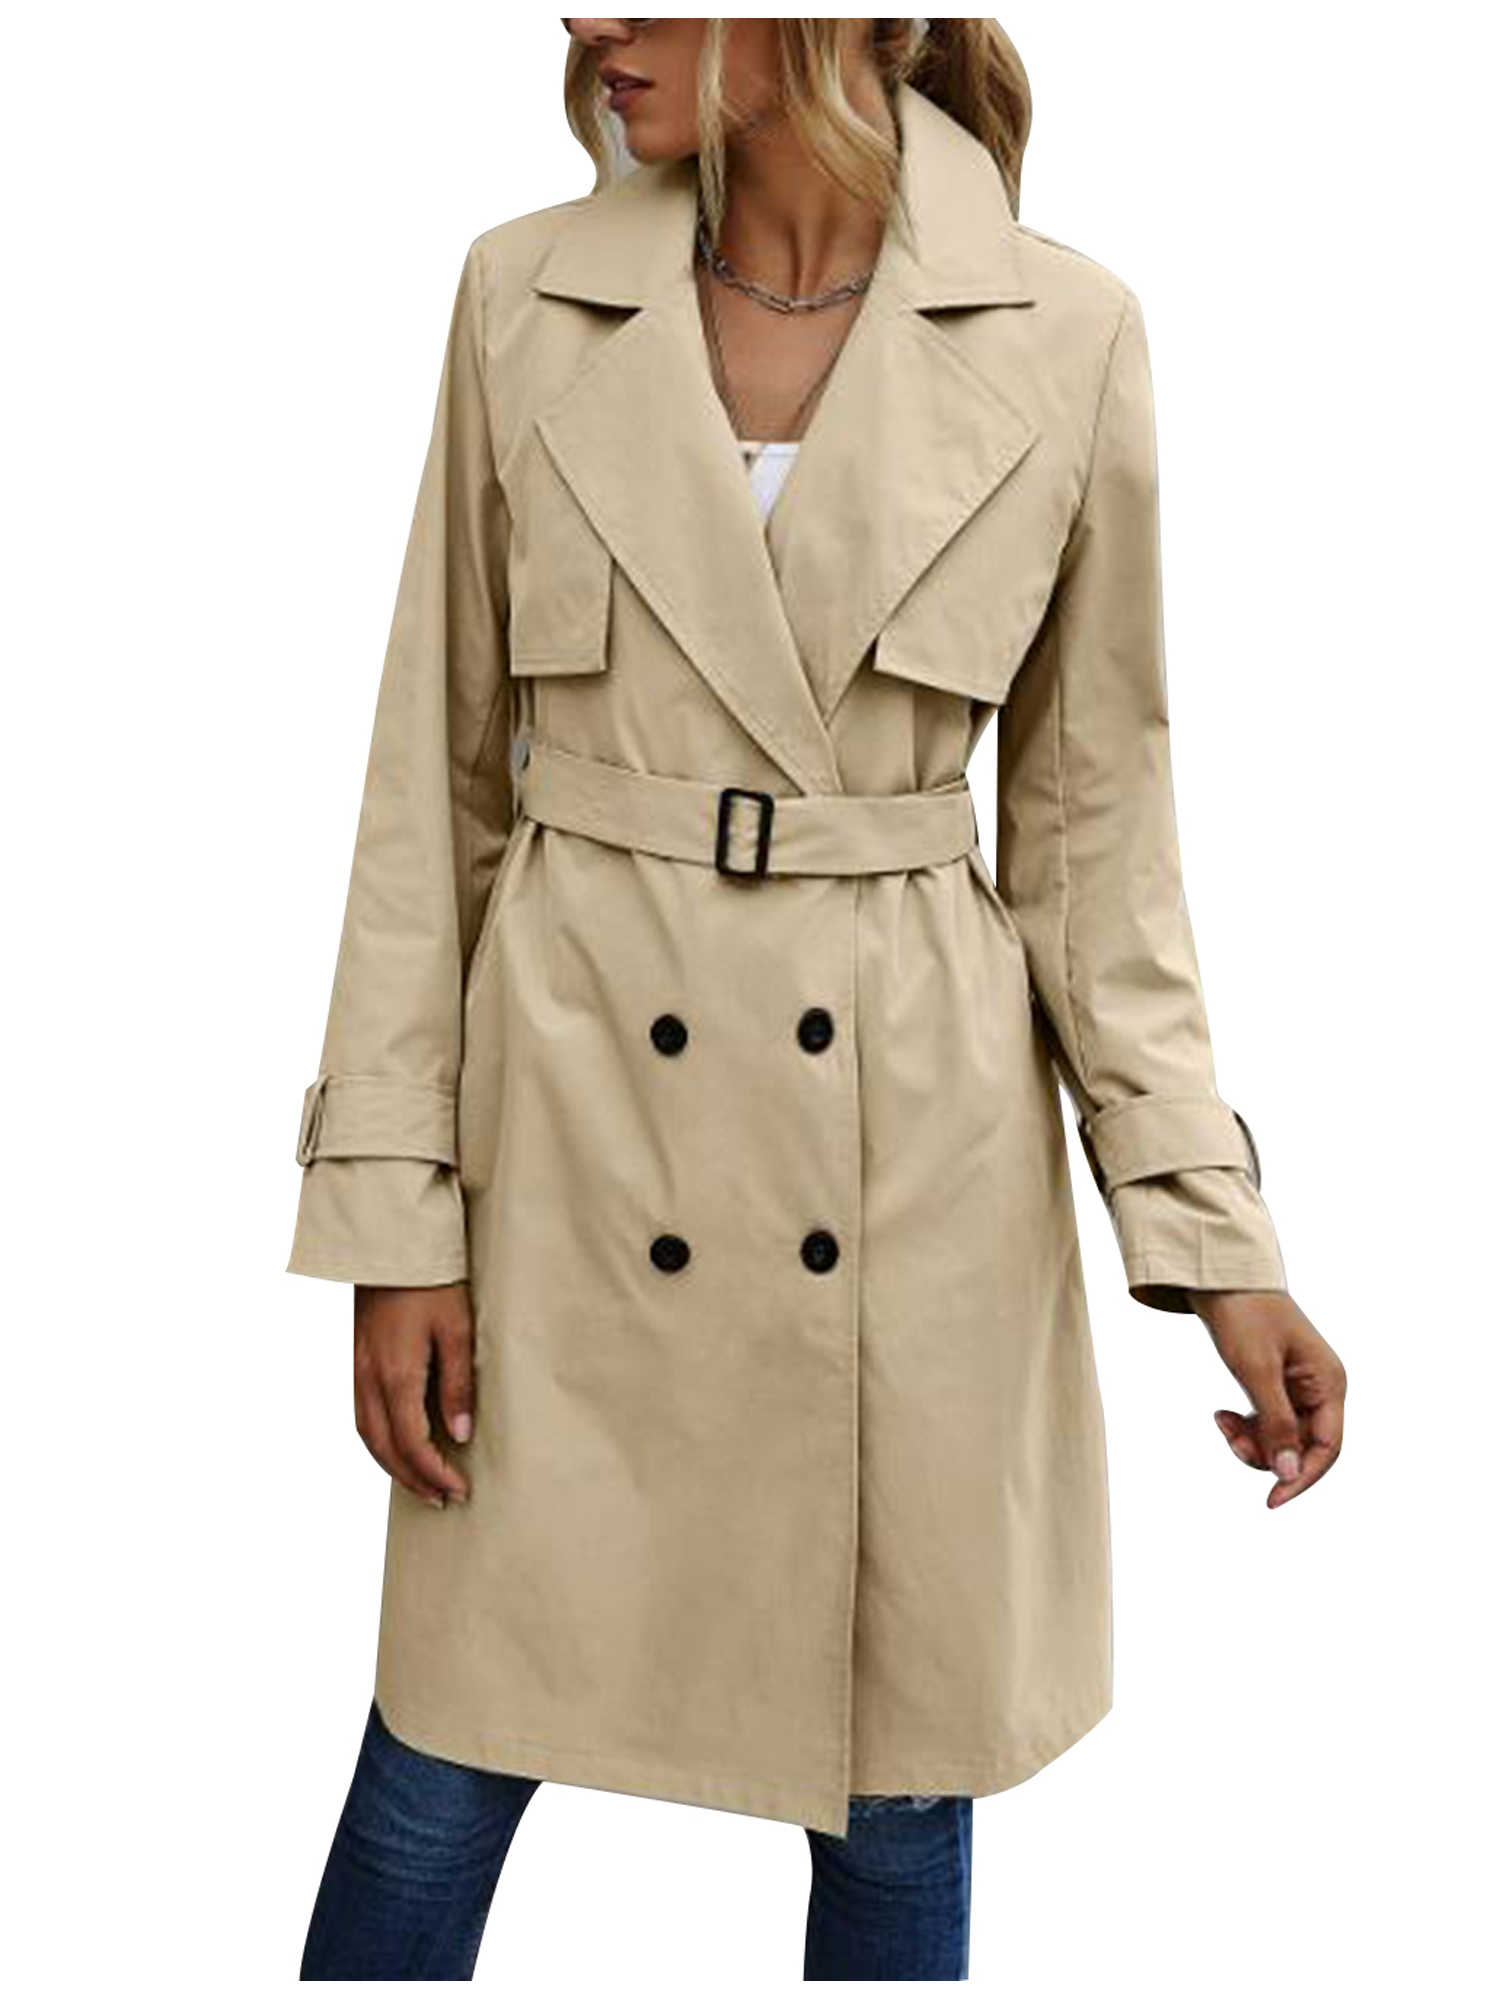 Spring hue Women Jacket Long Sleeve Lapel Double Breasted Belted Trench Coat - image 1 of 5